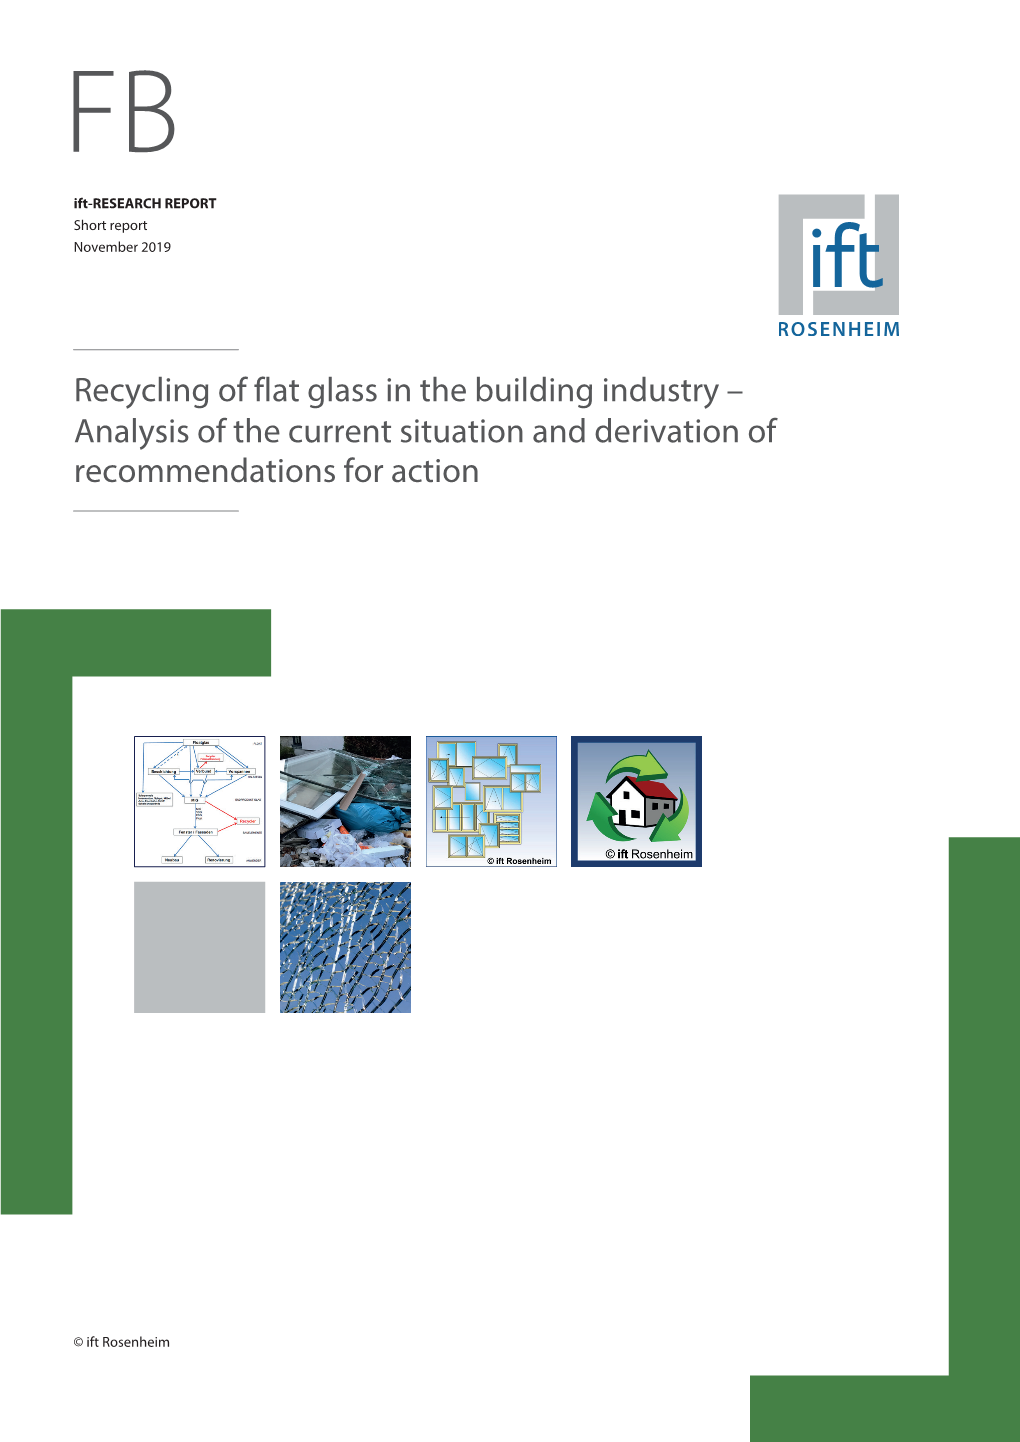 Recycling of Flat Glass in the Building Industry – Analysis of the Current Situation and Derivation of Recommendations for Action